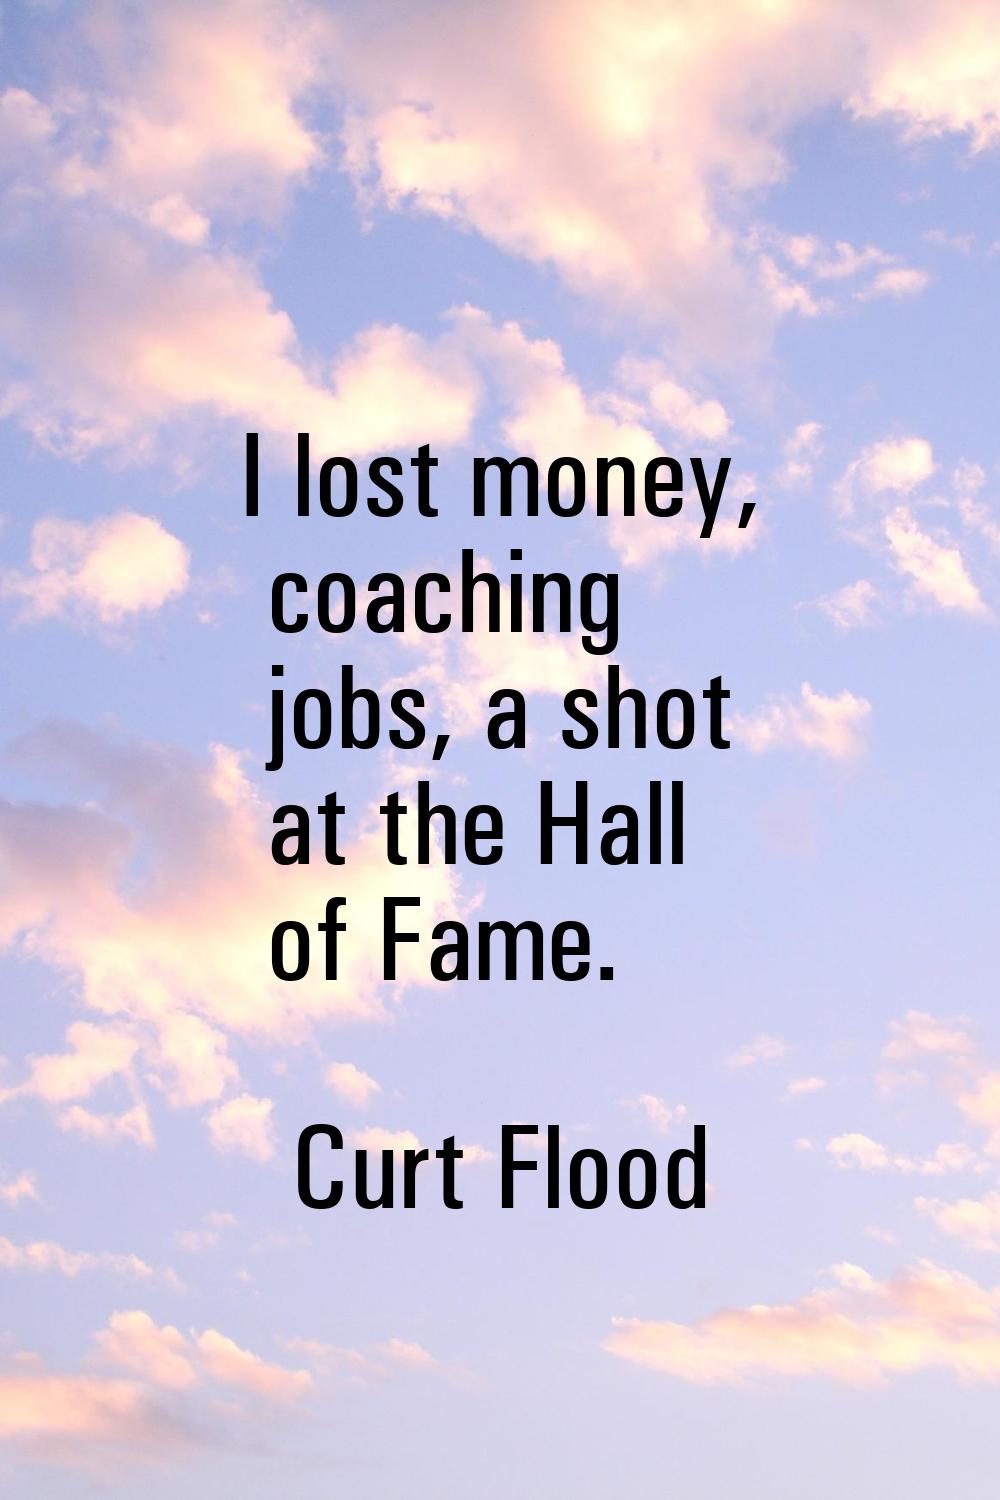 I lost money, coaching jobs, a shot at the Hall of Fame.